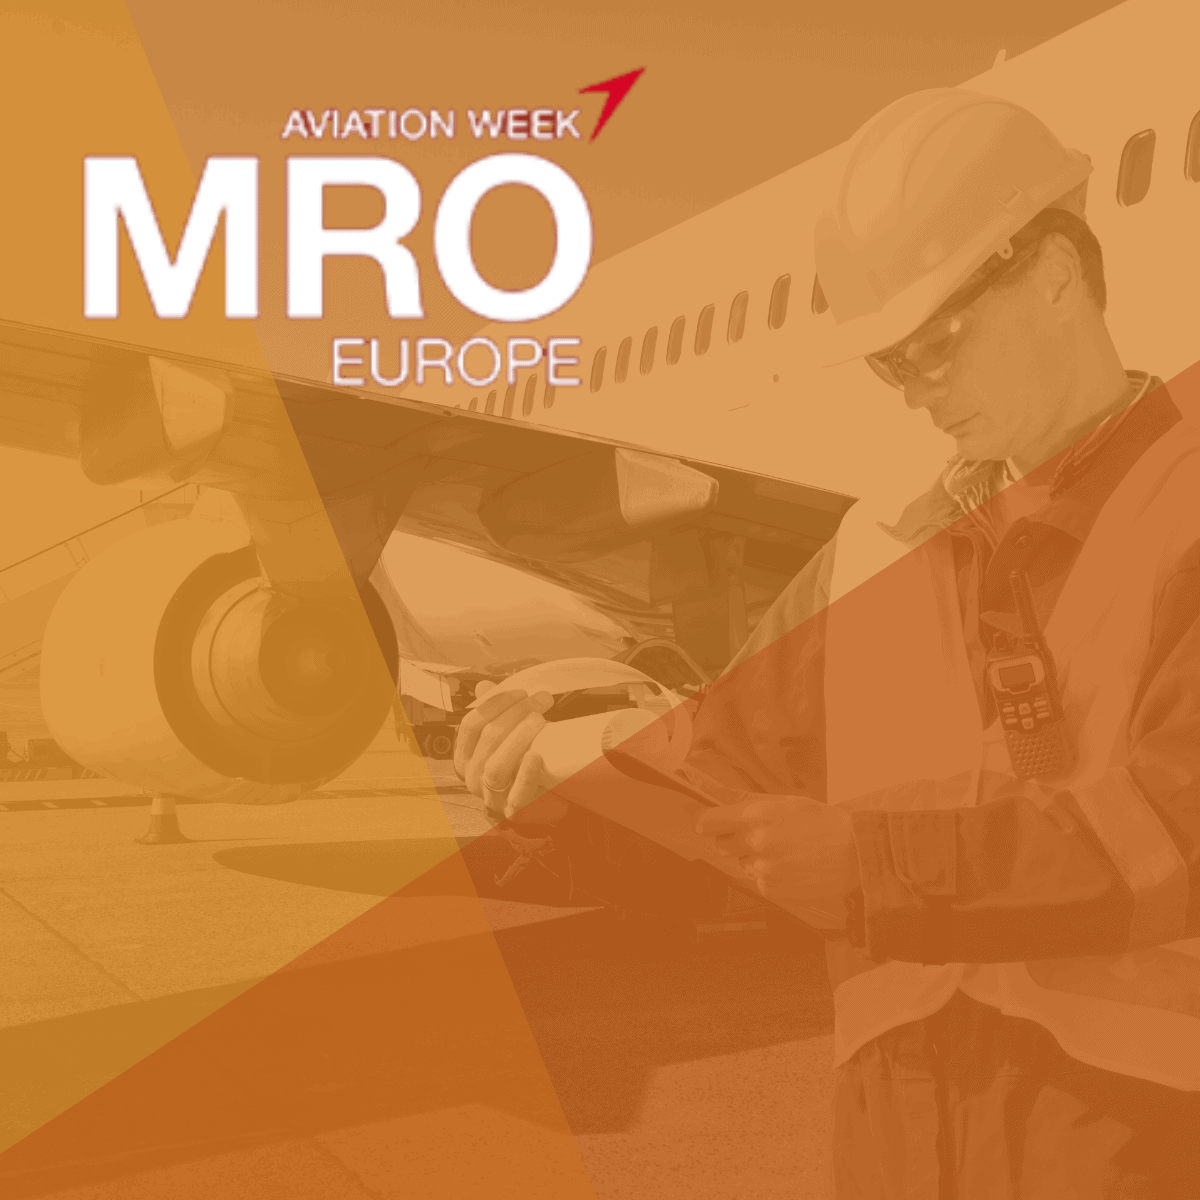 At MRO europe we presented our solution for fast paint repair on aircraft and faster MRO mainteance